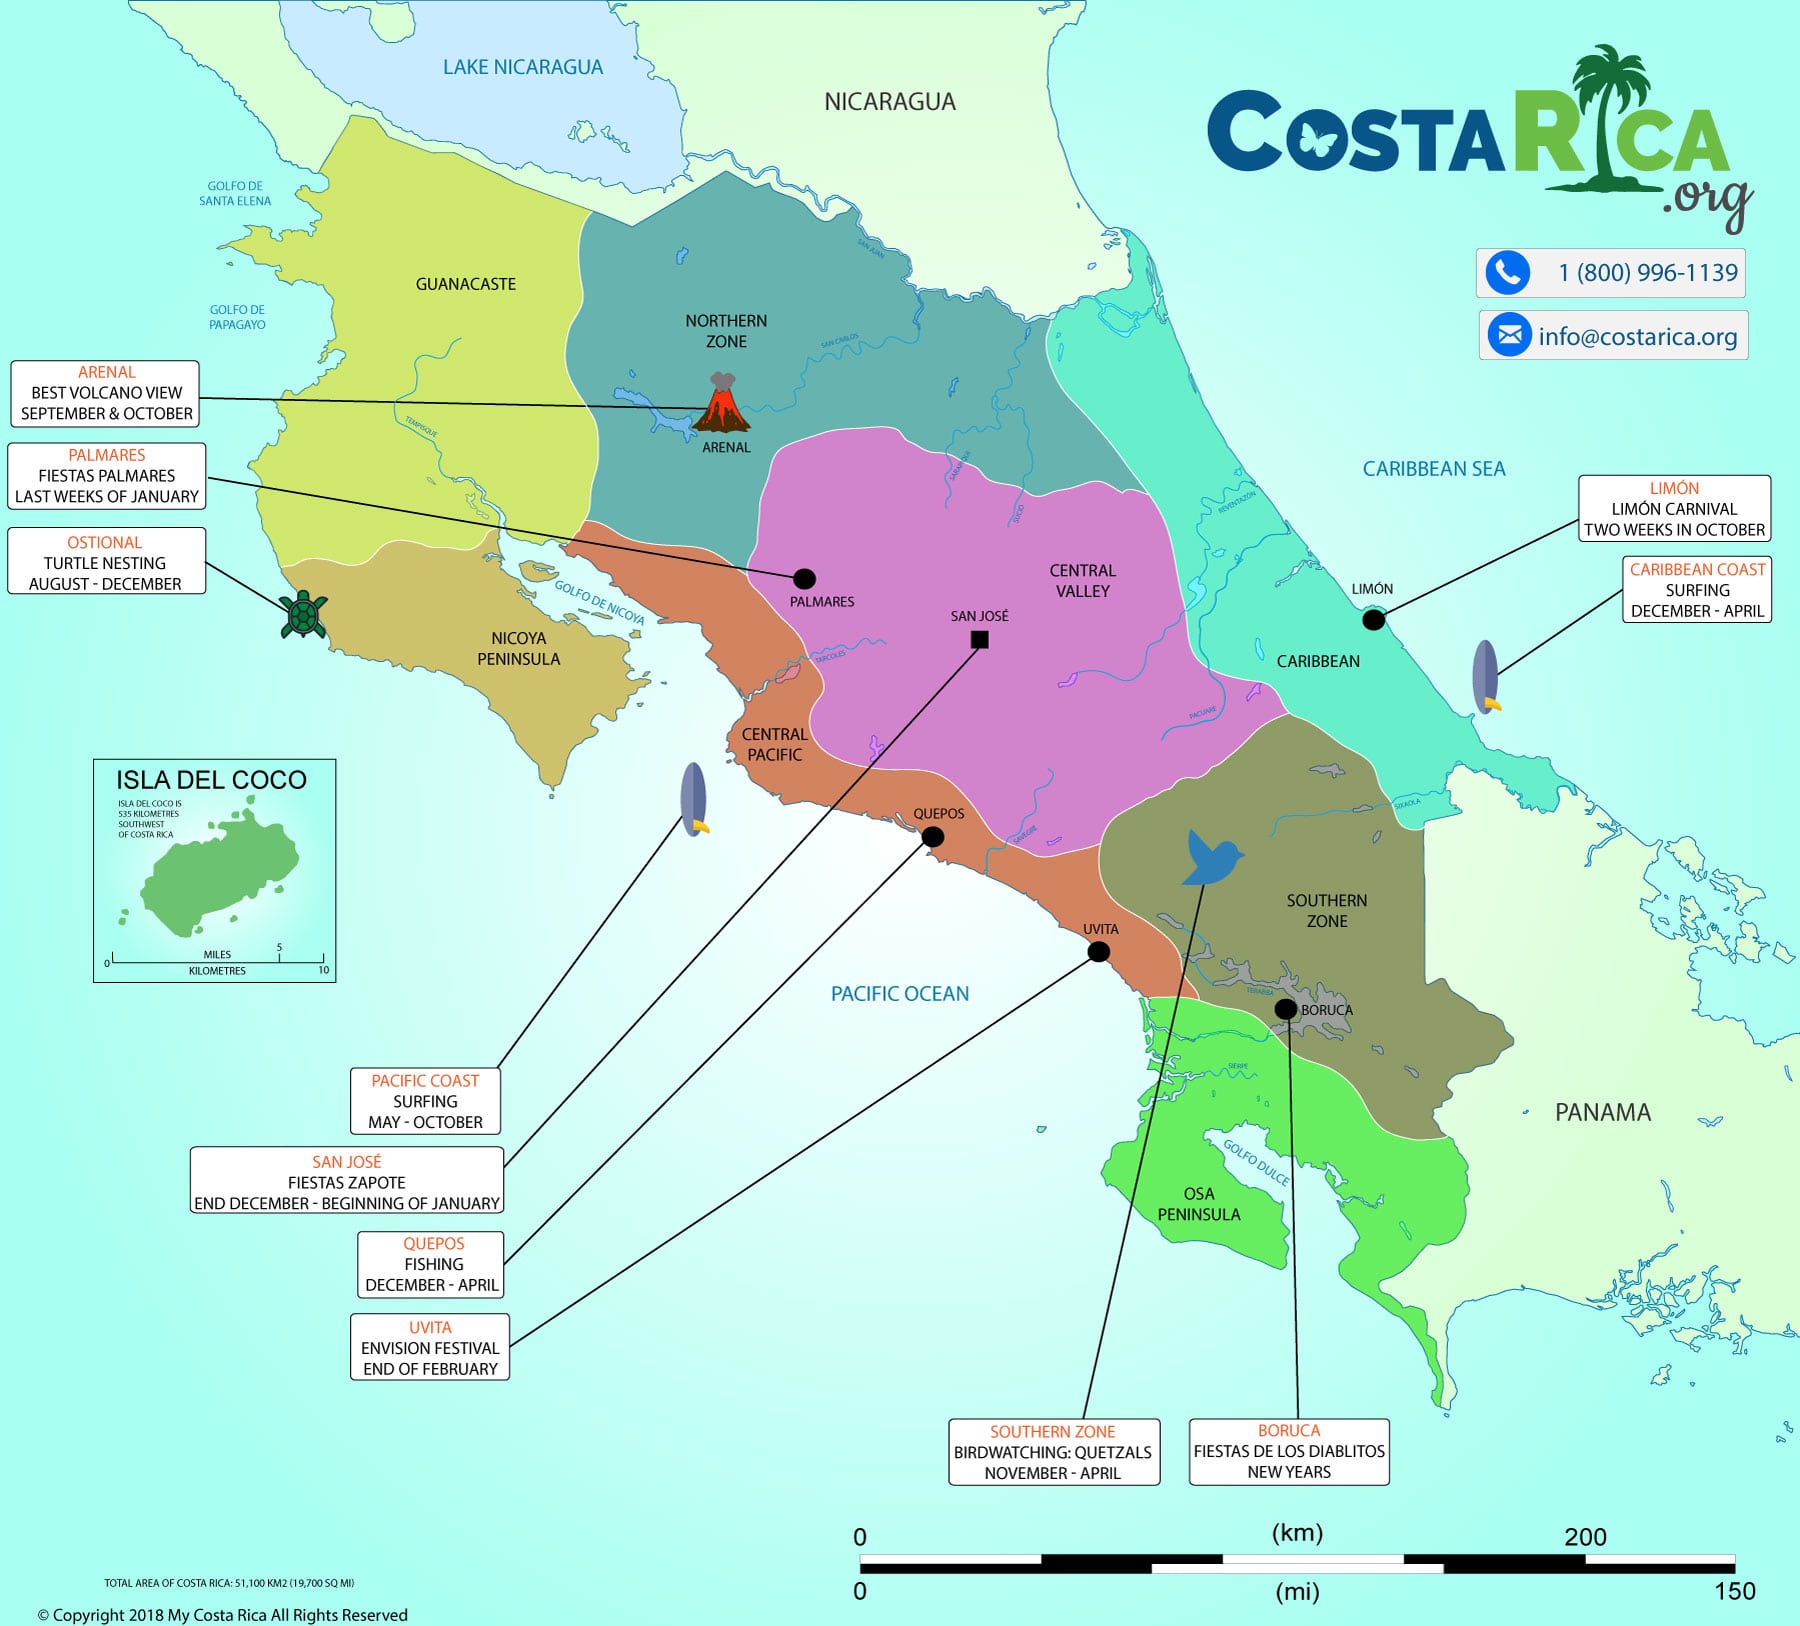 Costa Rica Maps - Every Map You Need for Your Trip to Costa Rica